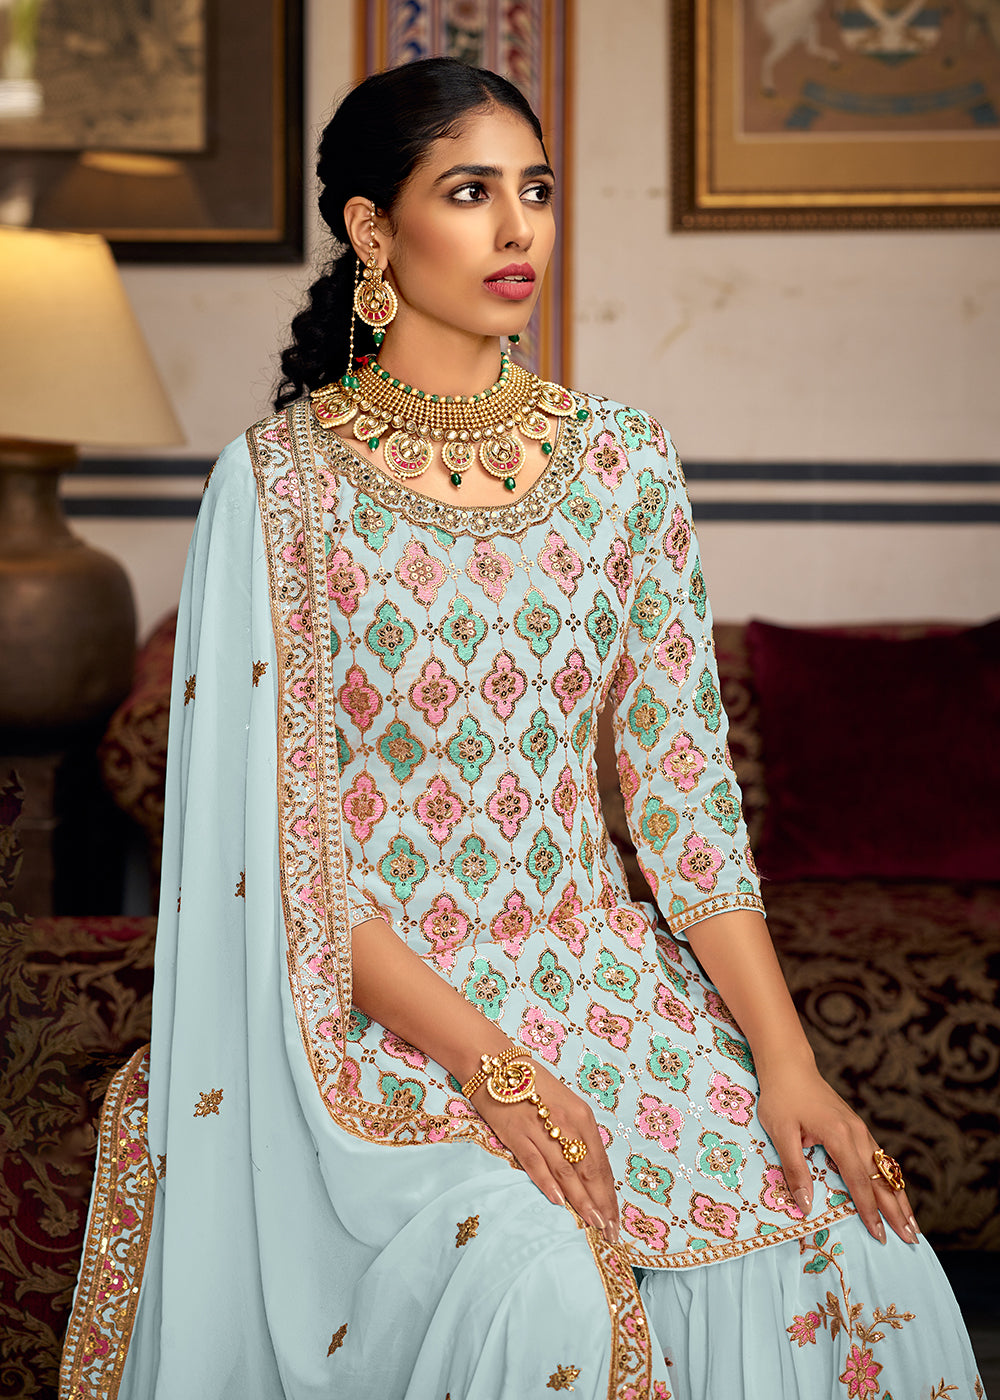 Shop Now Heavy Georgette Blue Sequins Embroidered Gharara Suit Online at Empress Clothing in USA, UK, Canada, Italy & Worldwide.